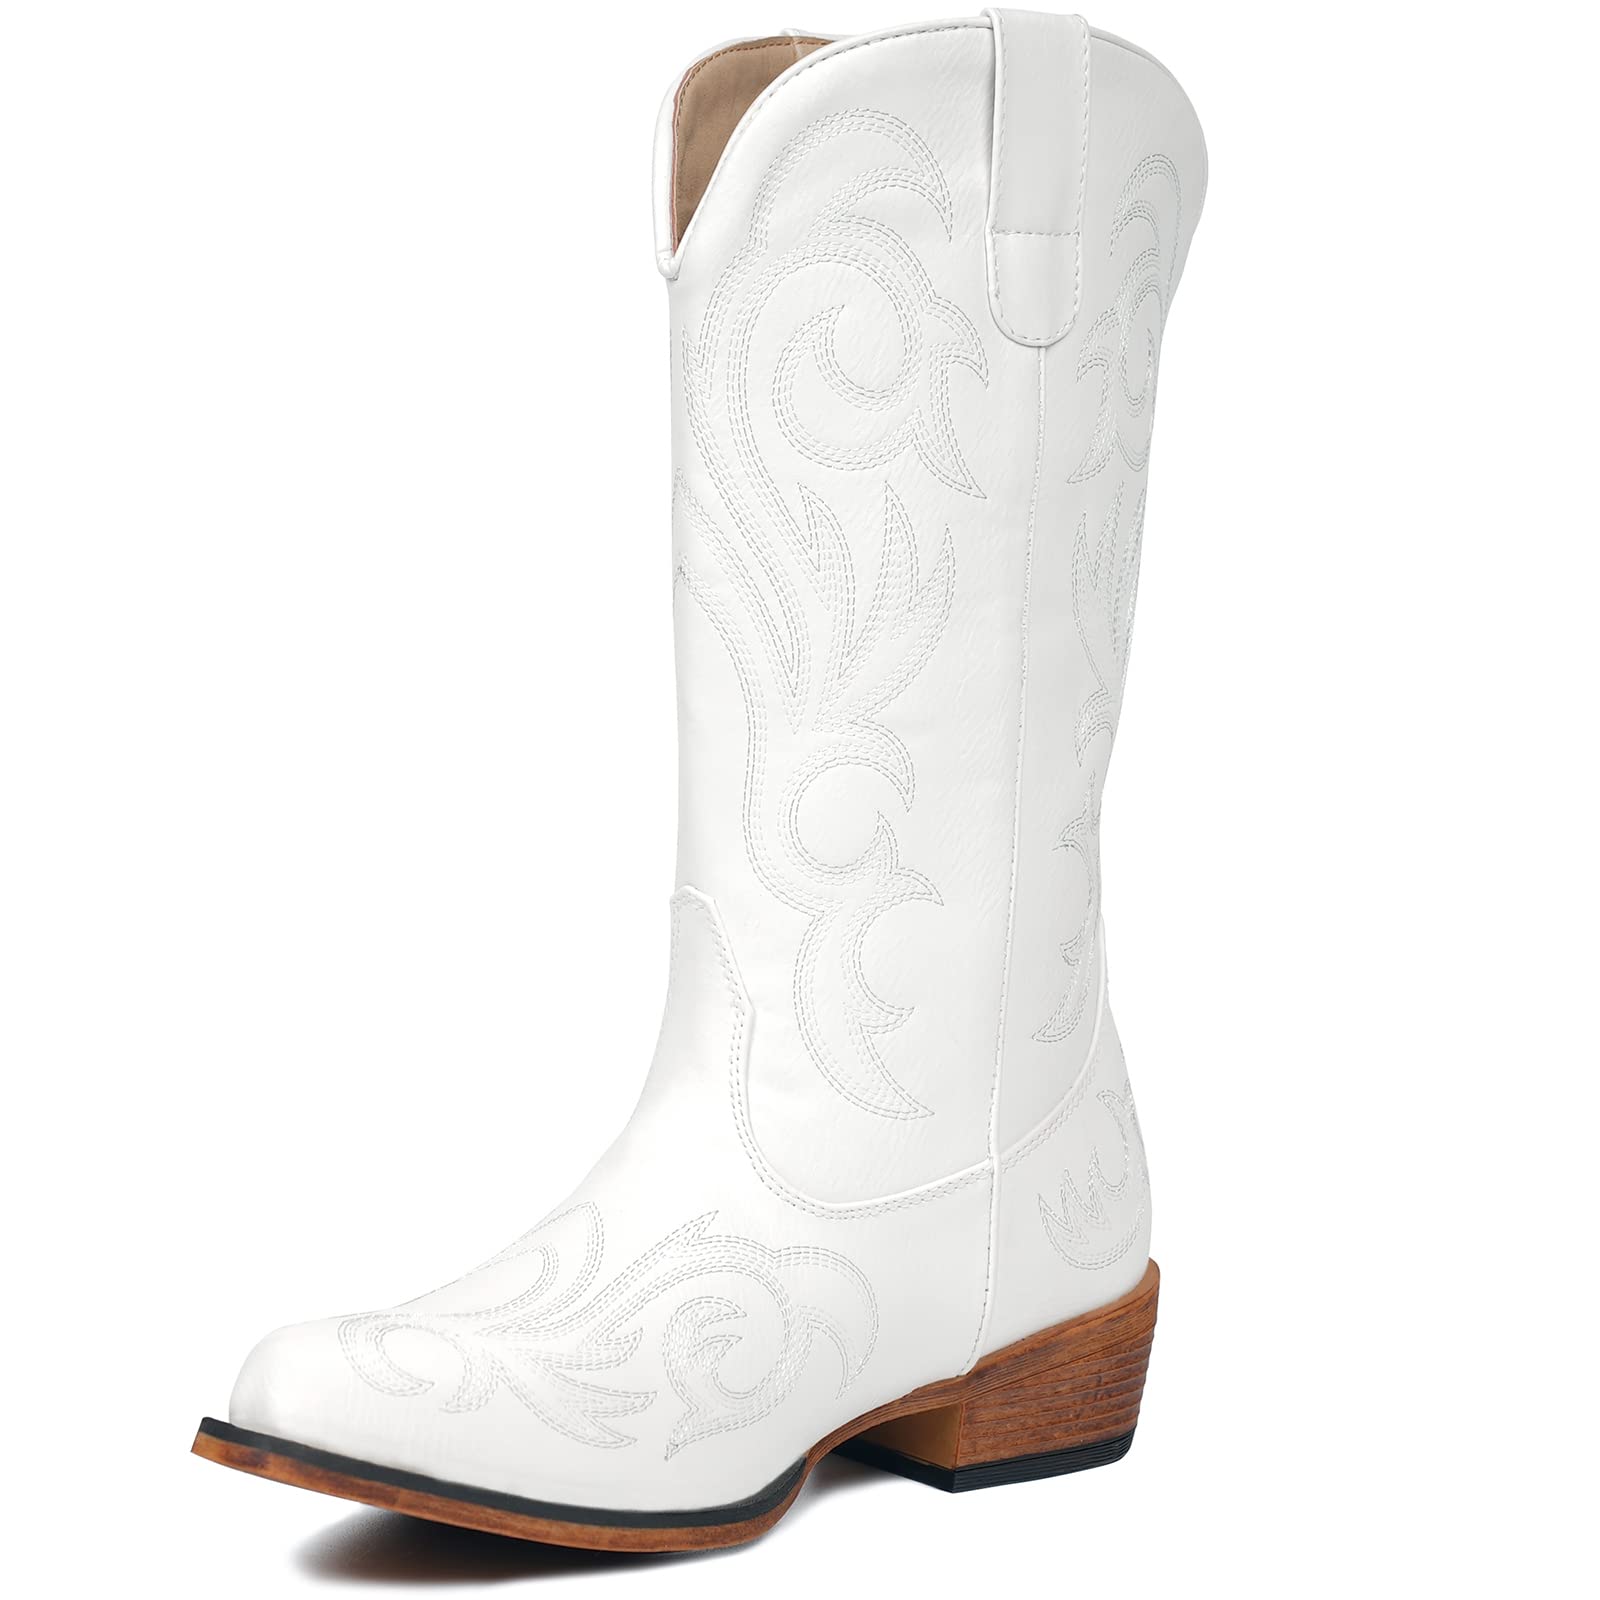 Canyon Trails Women's Embroidered Western Rodeo Cowboy Boots - Walmart.com